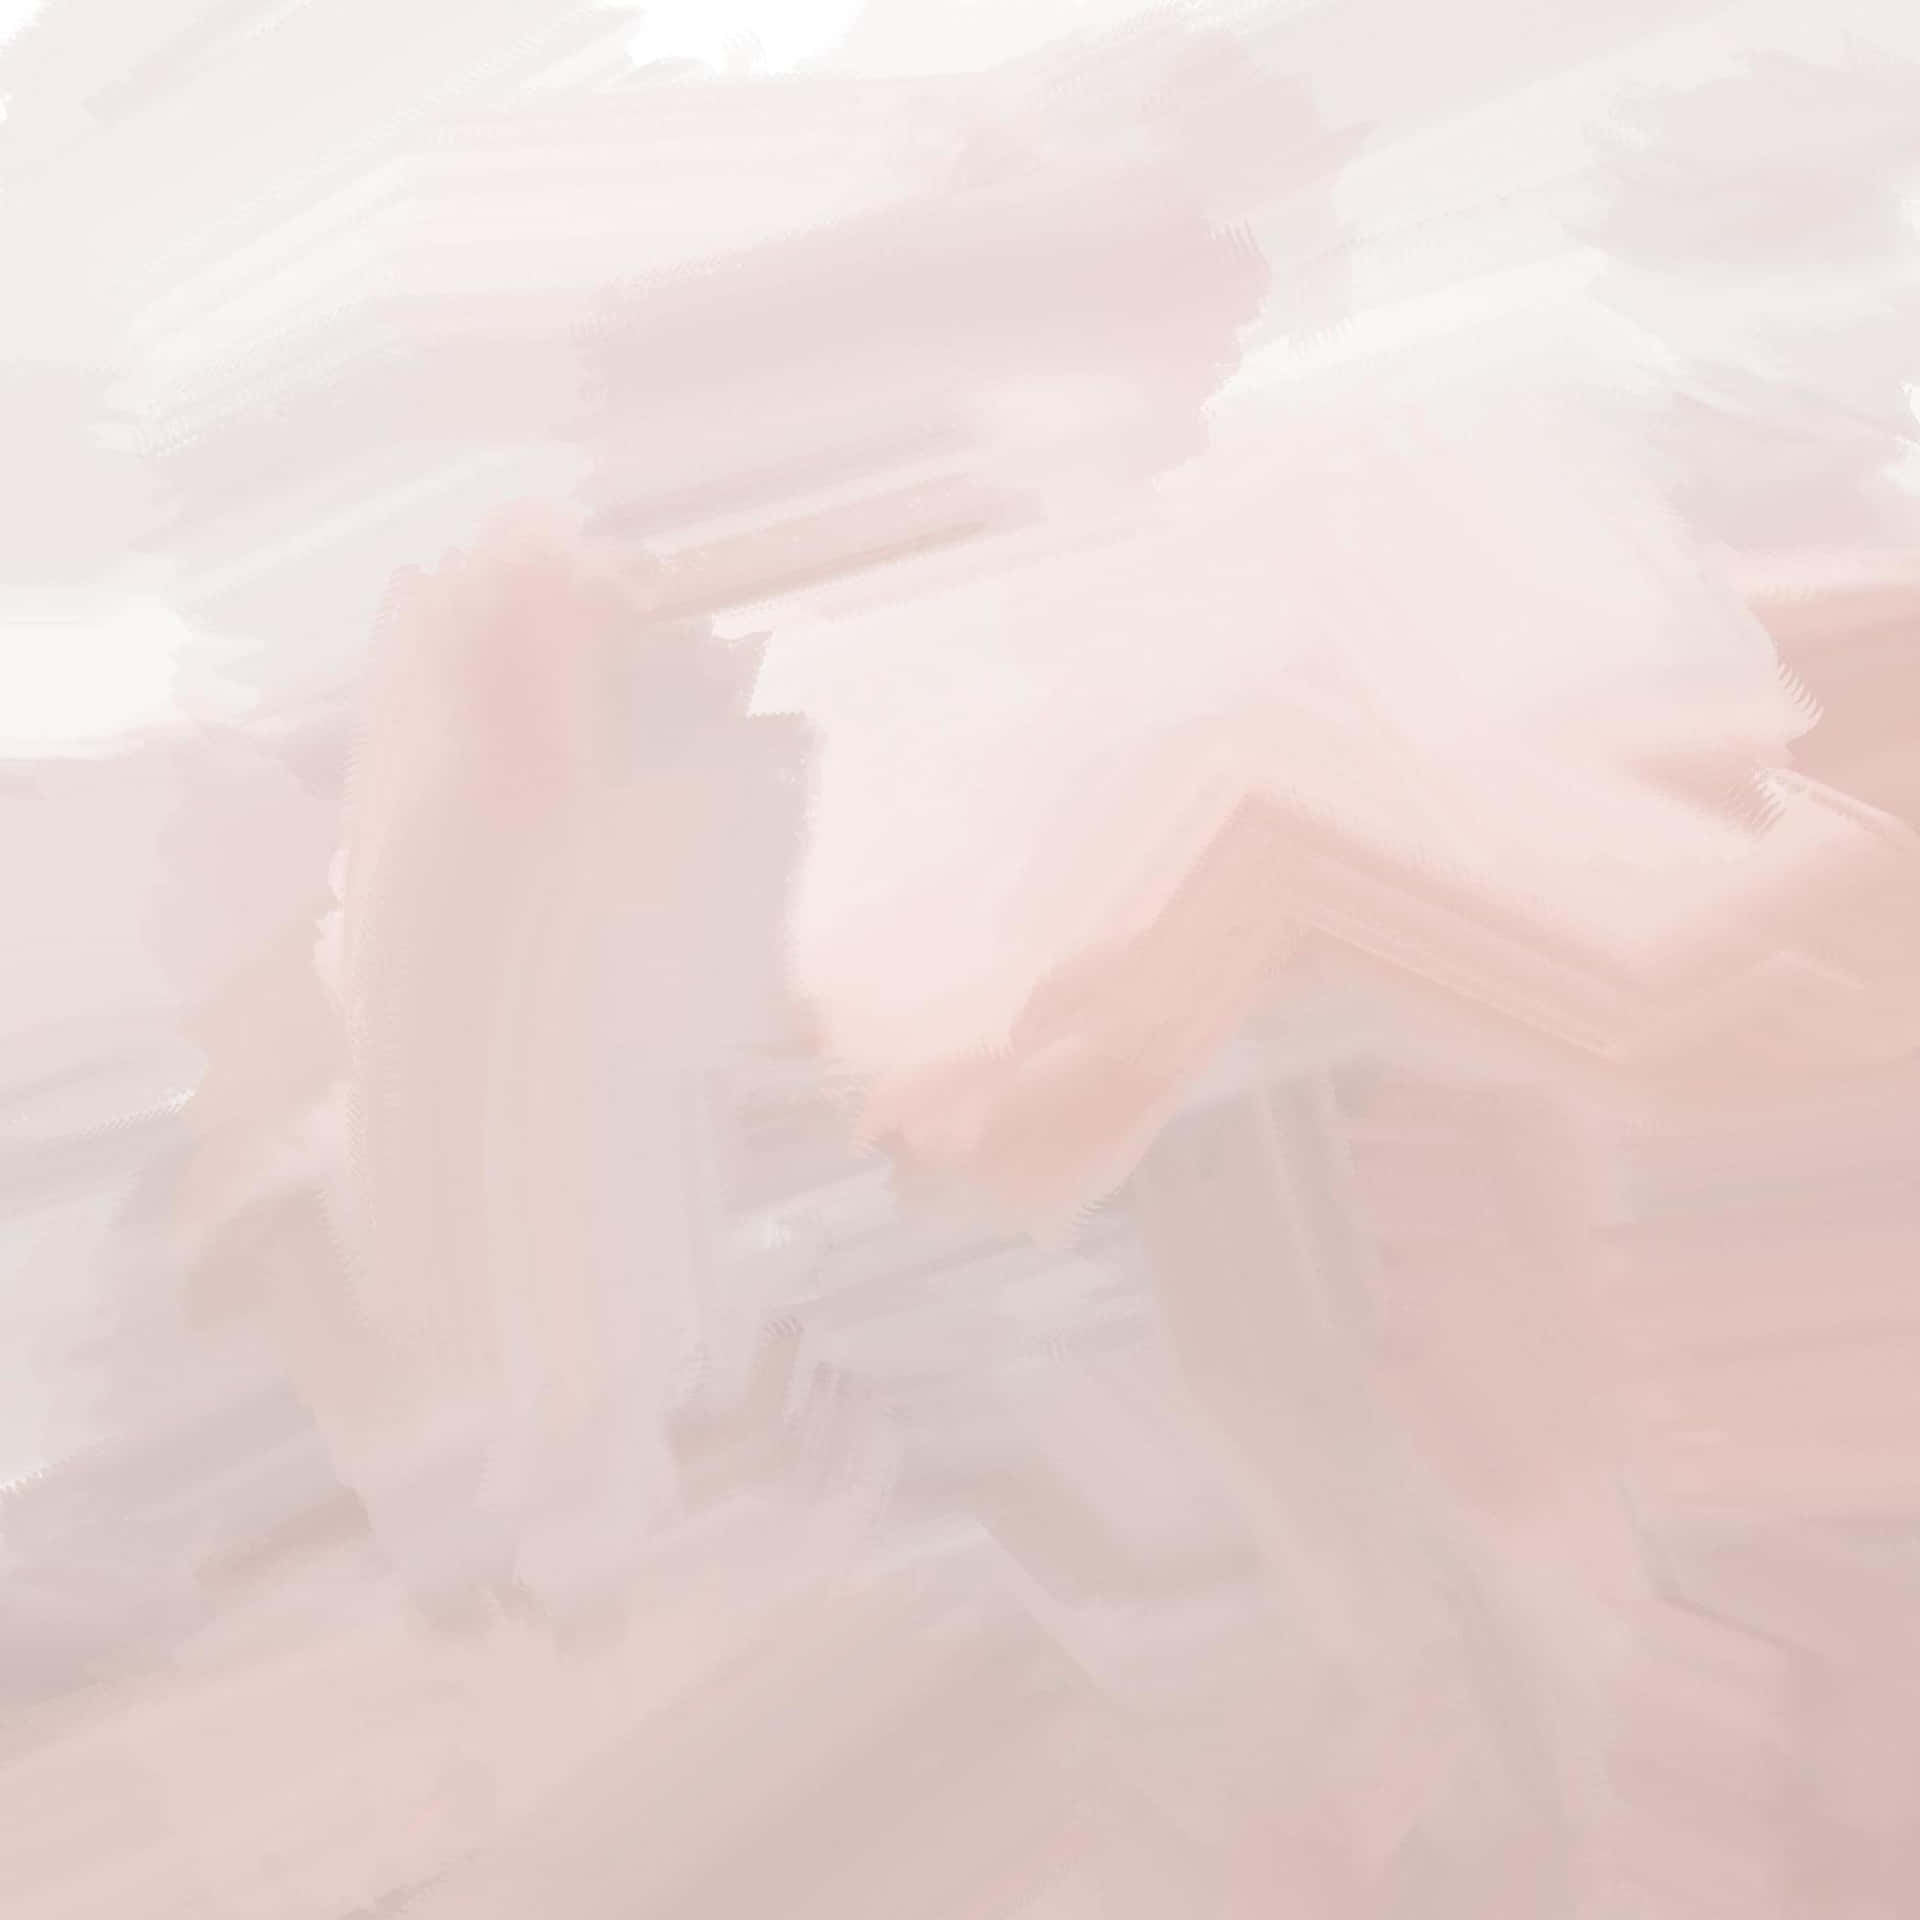 A Pink And White Painting With A Brush